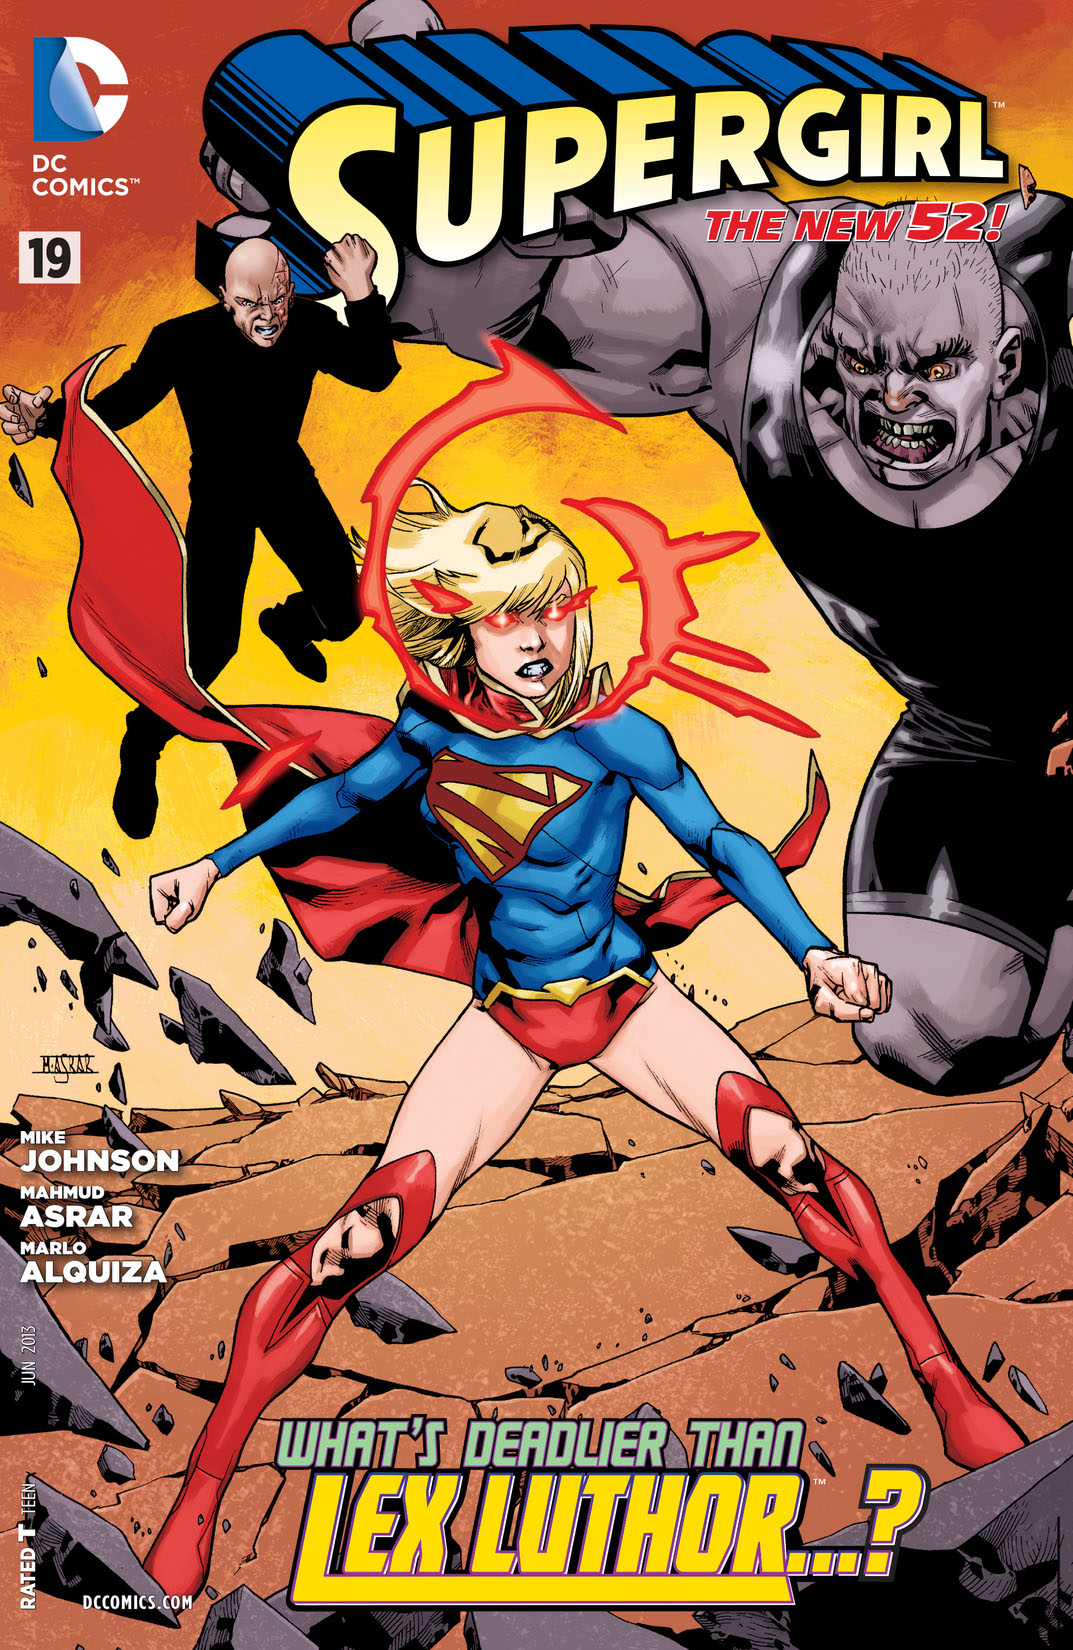 Supergirl (2011-) #19 preview images